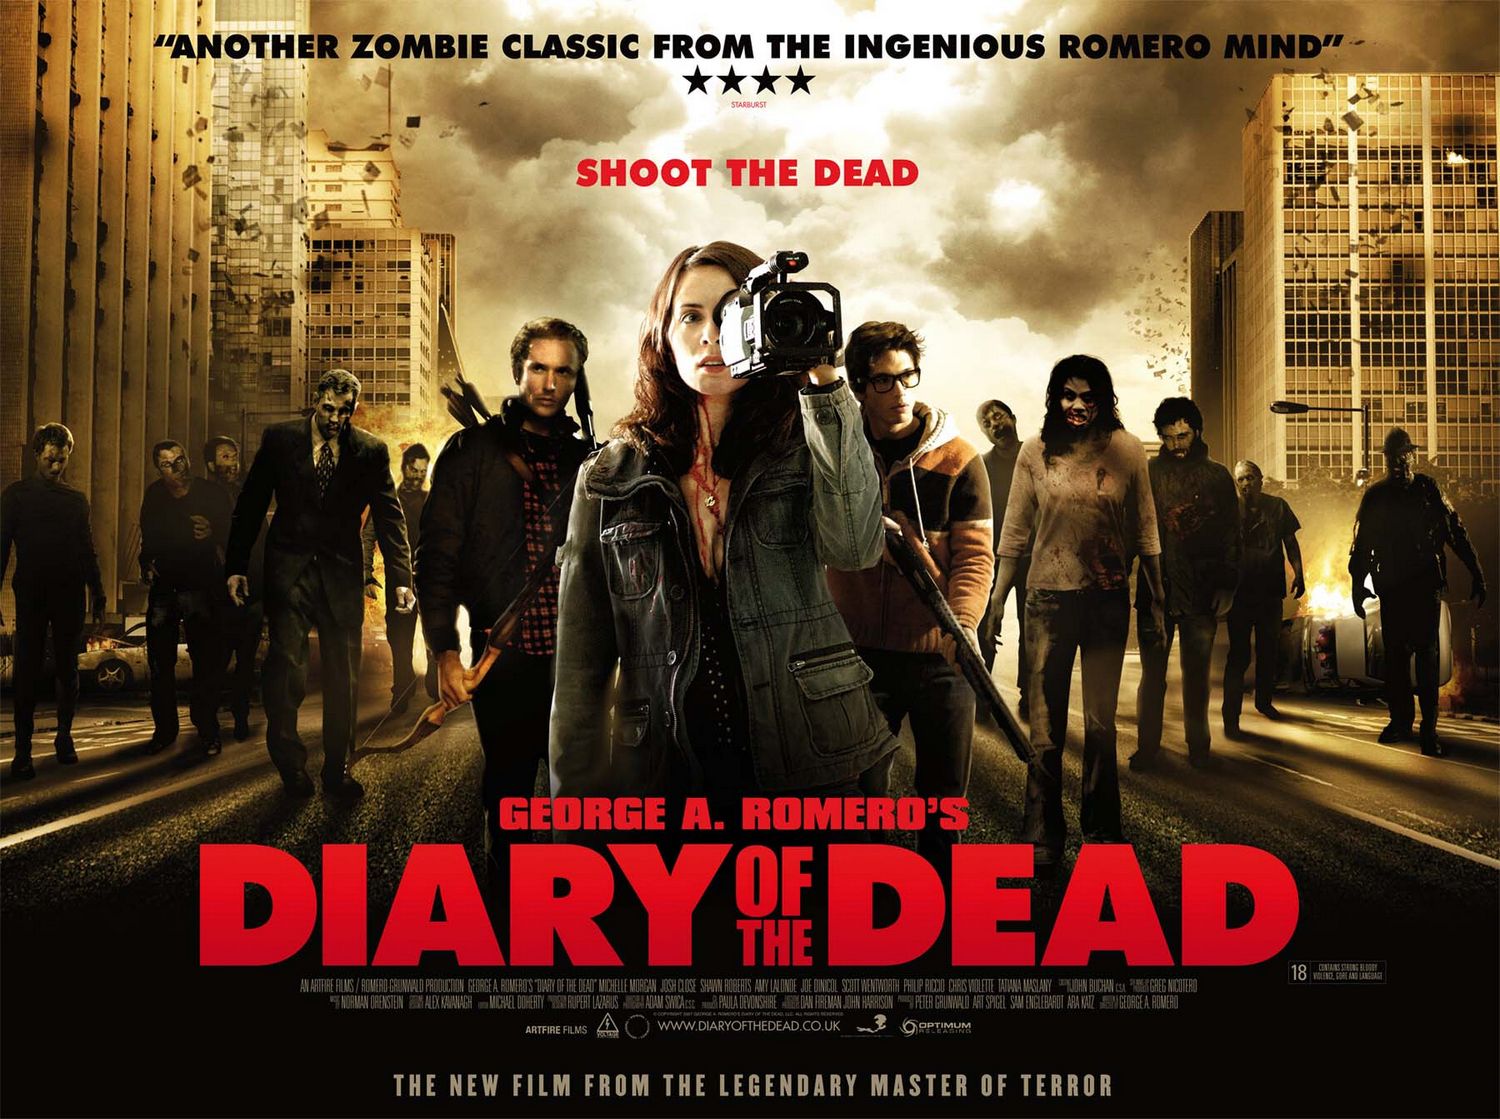 Extra Large Movie Poster Image for Diary of the Dead (#3 of 4)